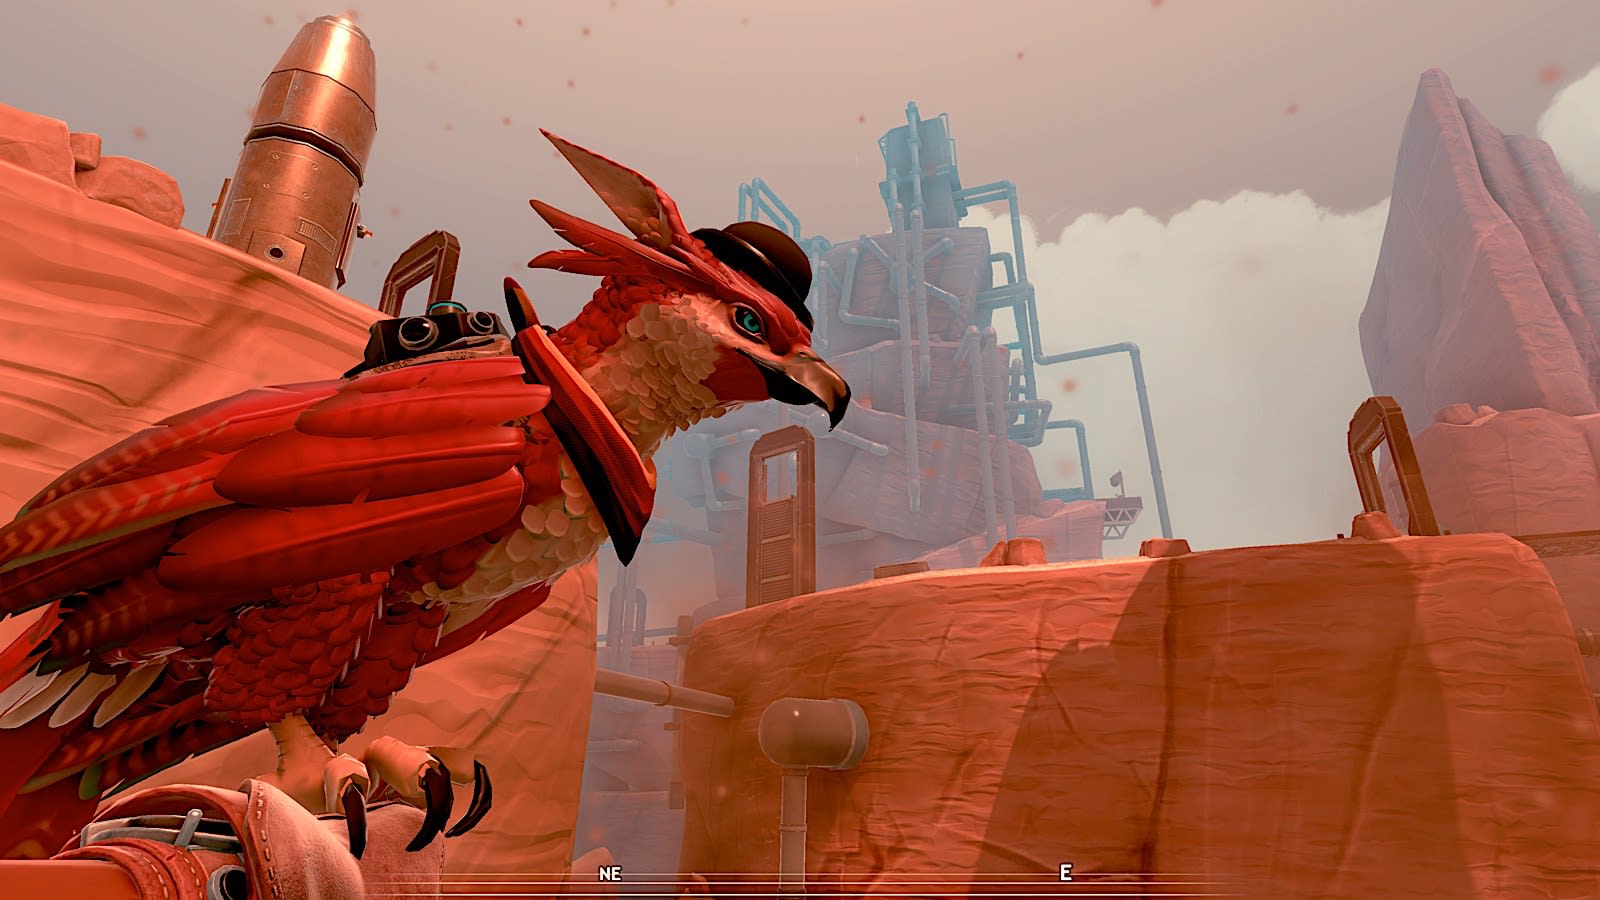 for world and your heritage in 'Falcon Age' |